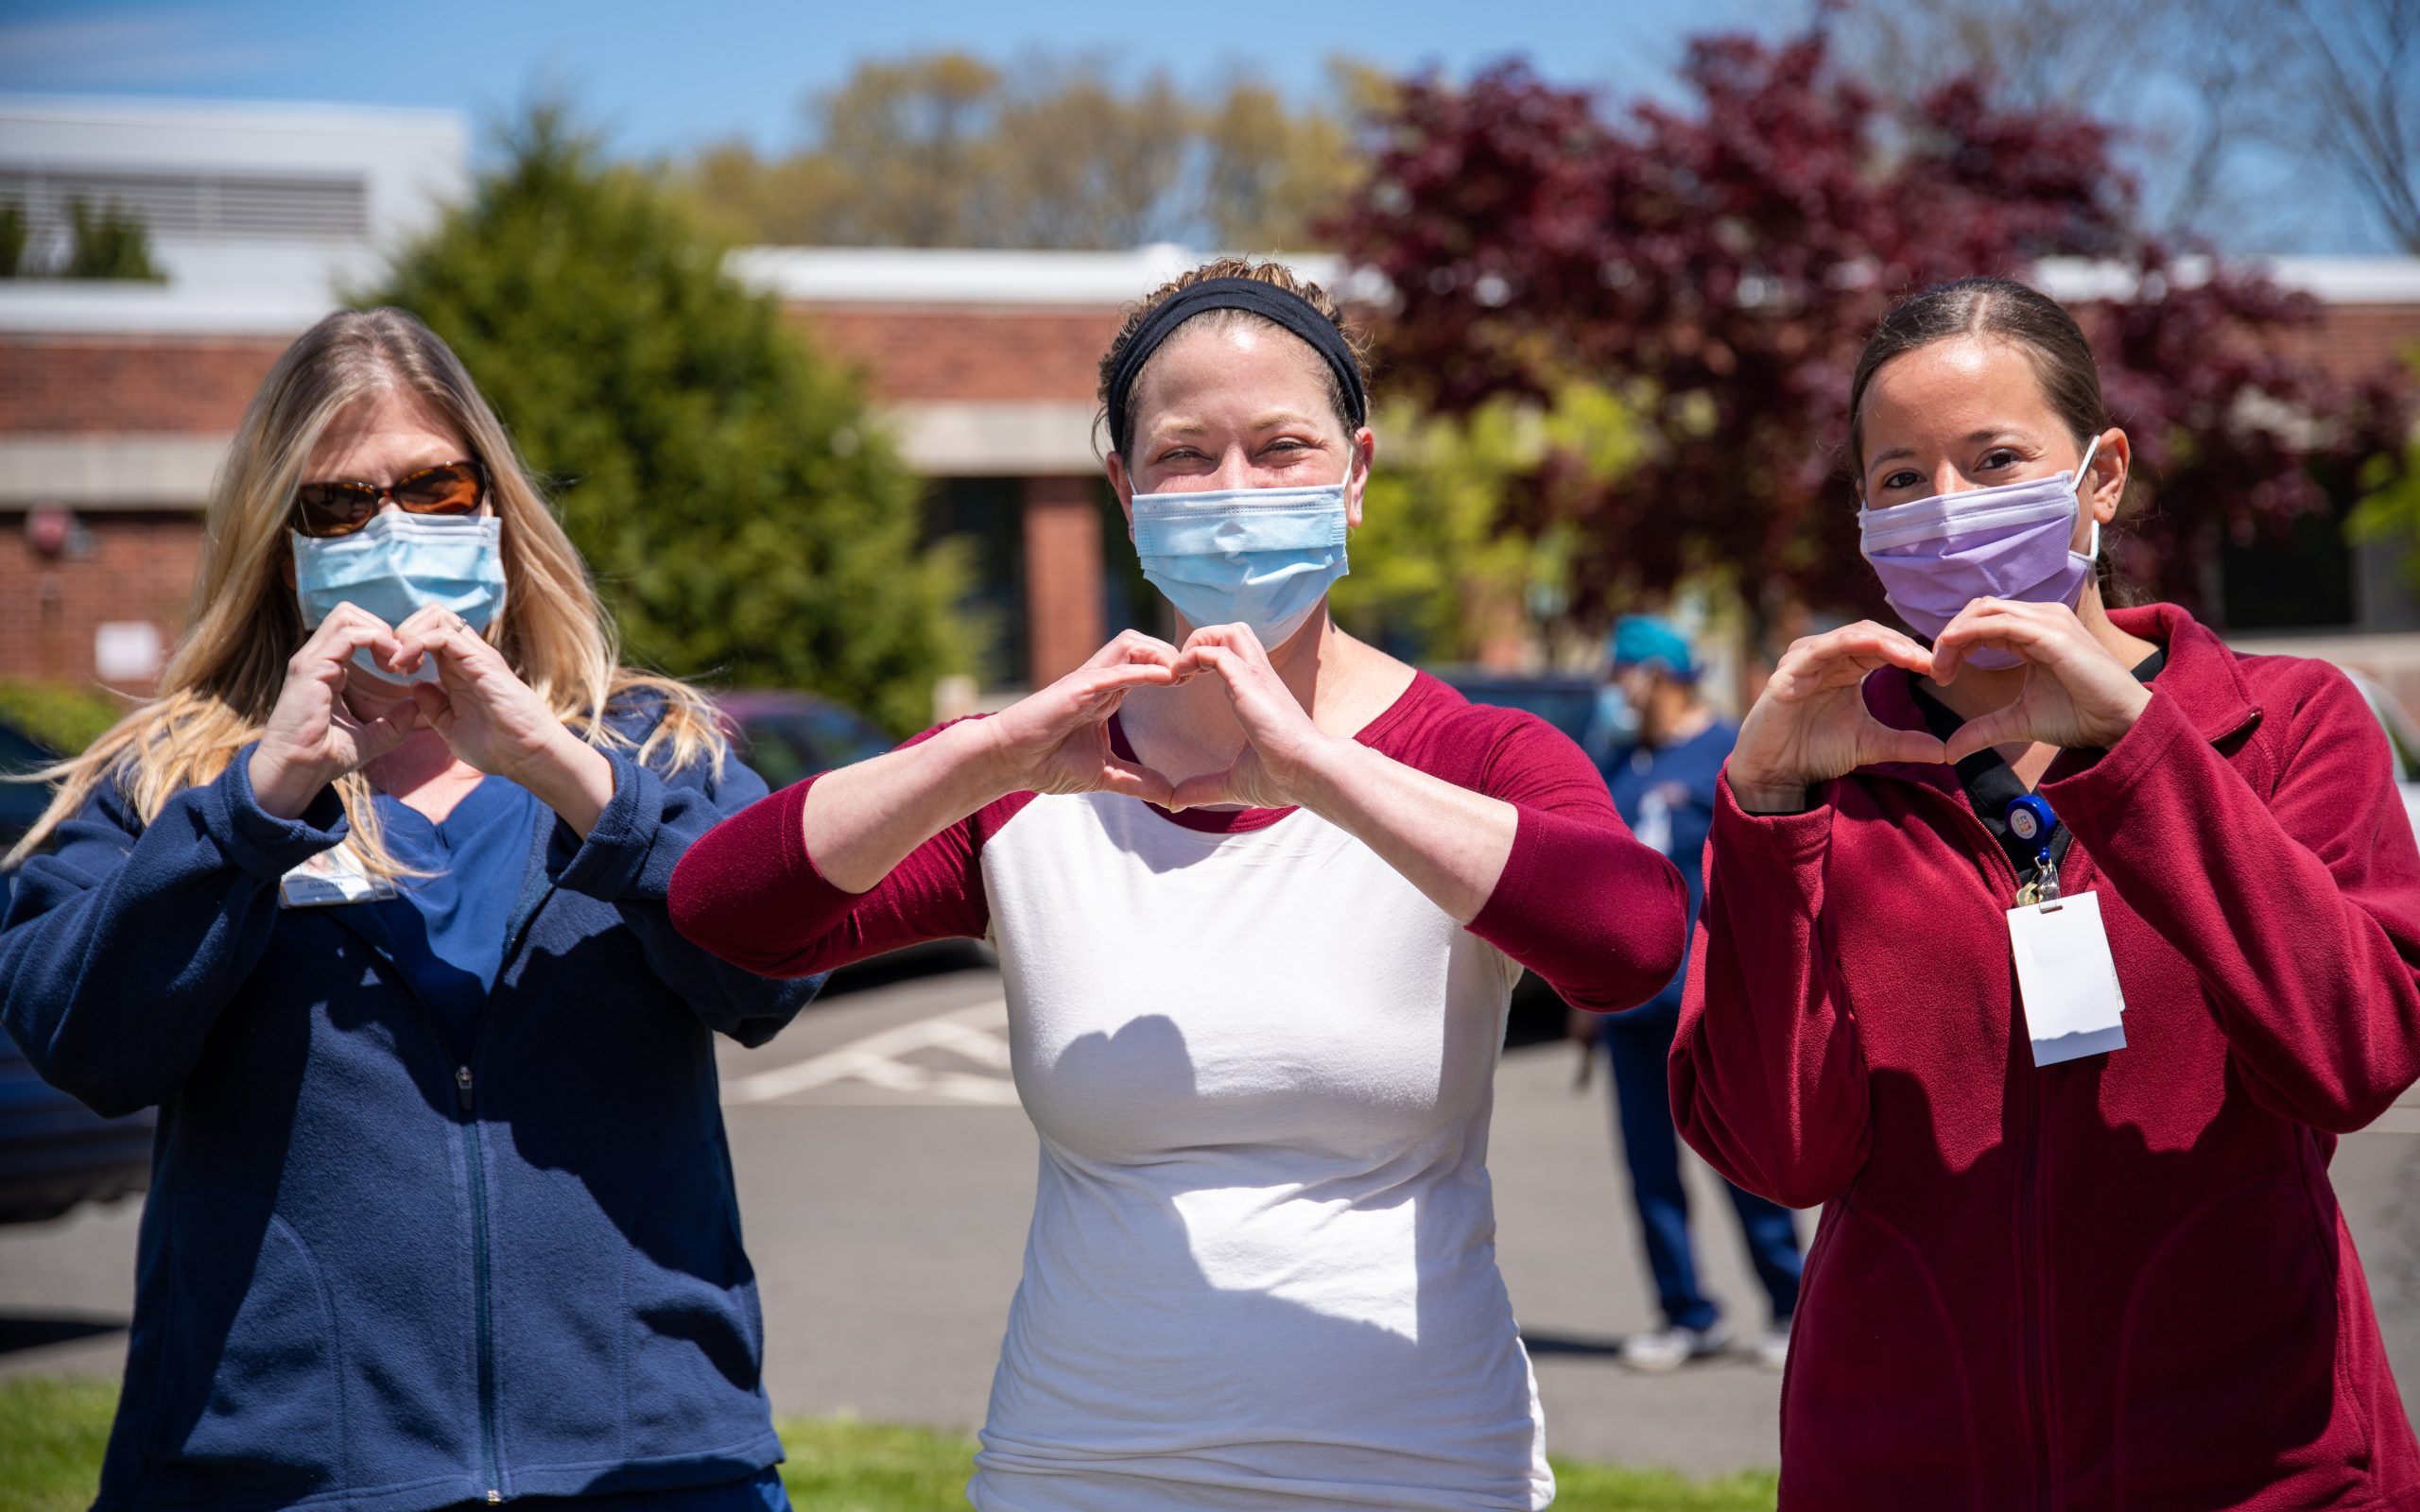 Three care workers making heart signs with their hands